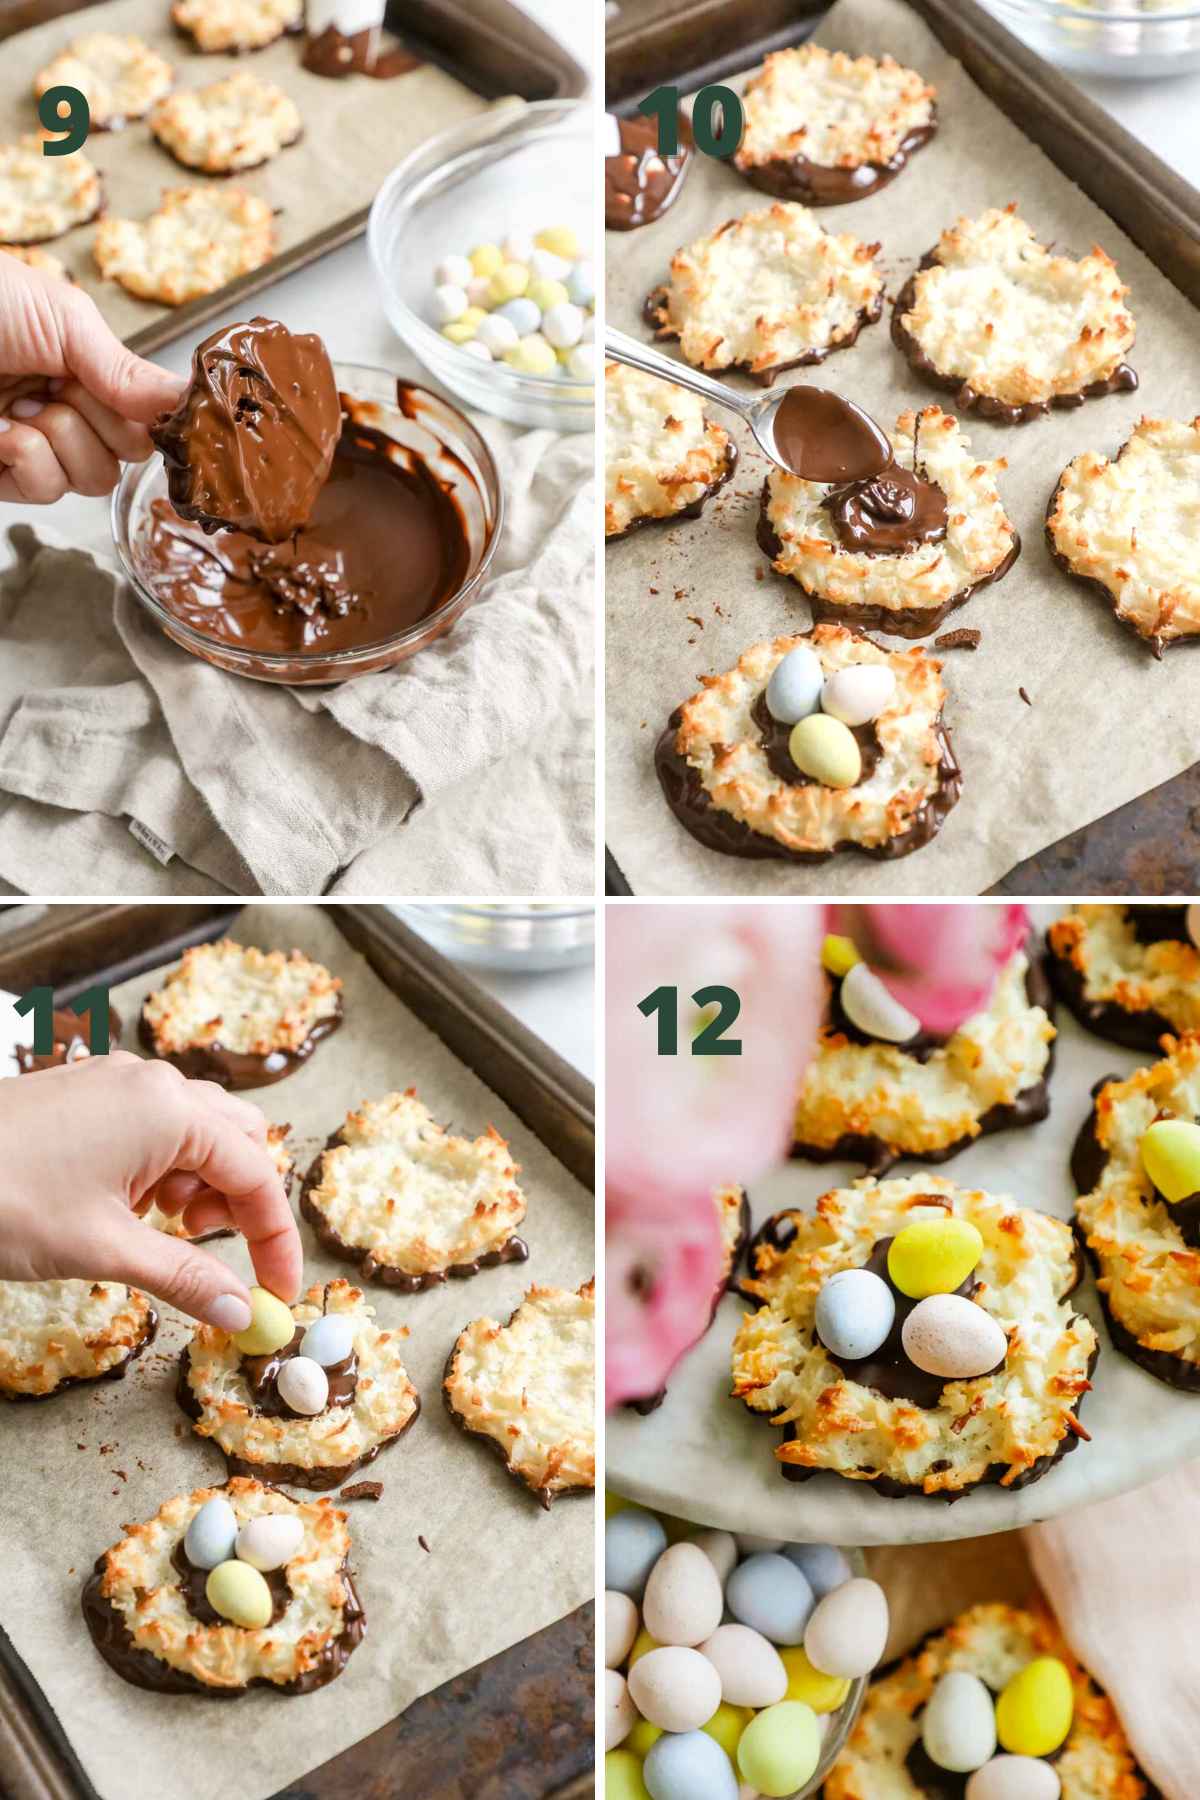 Steps to make chocolate covered coconut macaroon nests, including dipping bottoms in chocolate, adding dollop of chocolate in the nest, and adding Cadbury mini eggs.